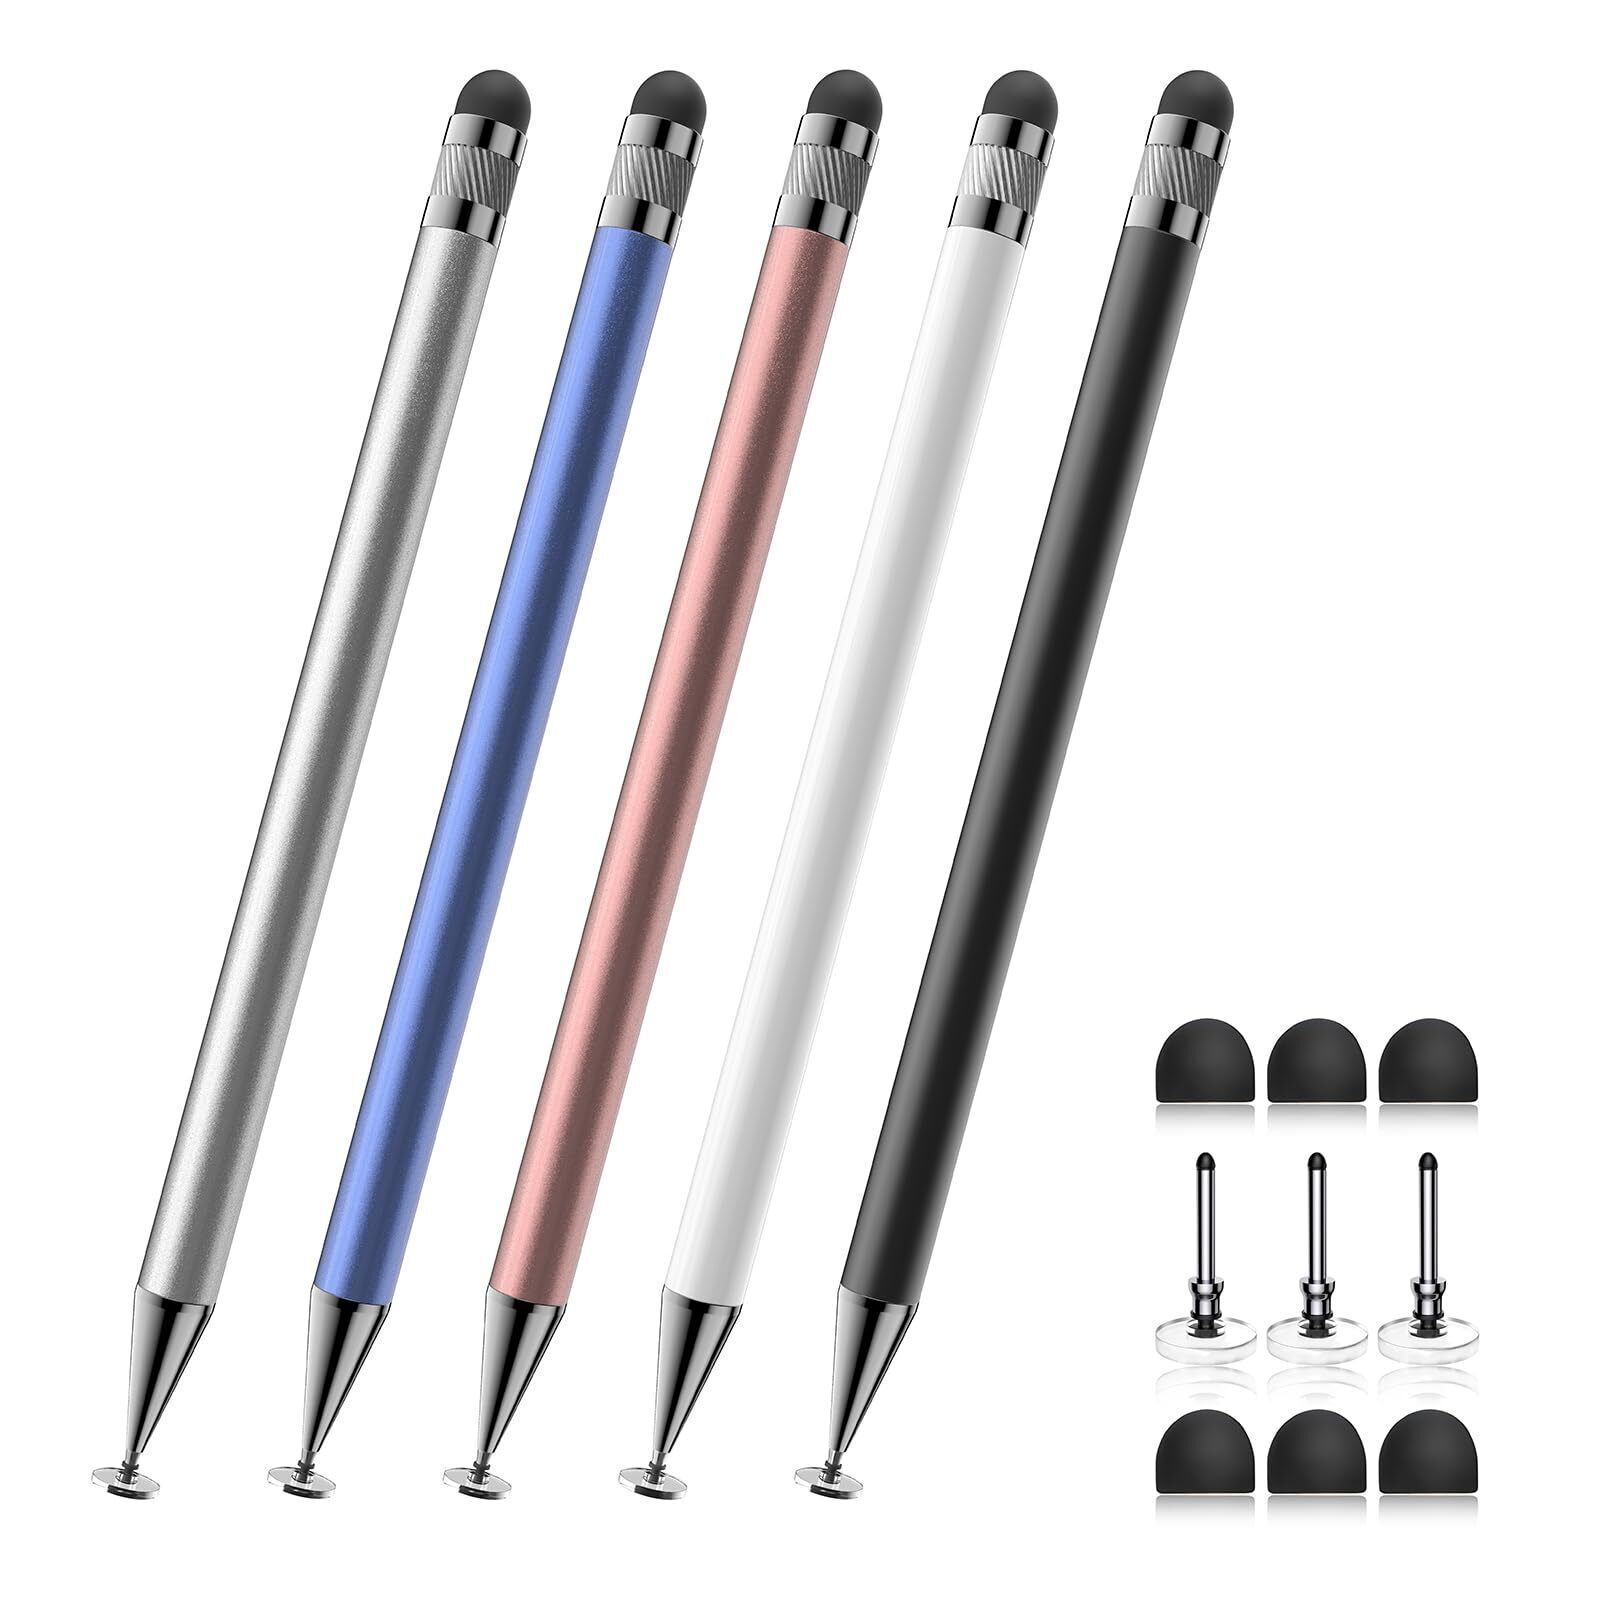 Stylus (5 Pcs), 2-in-1 Stylus Pen for Touch Screen, High Precision and Sensit...